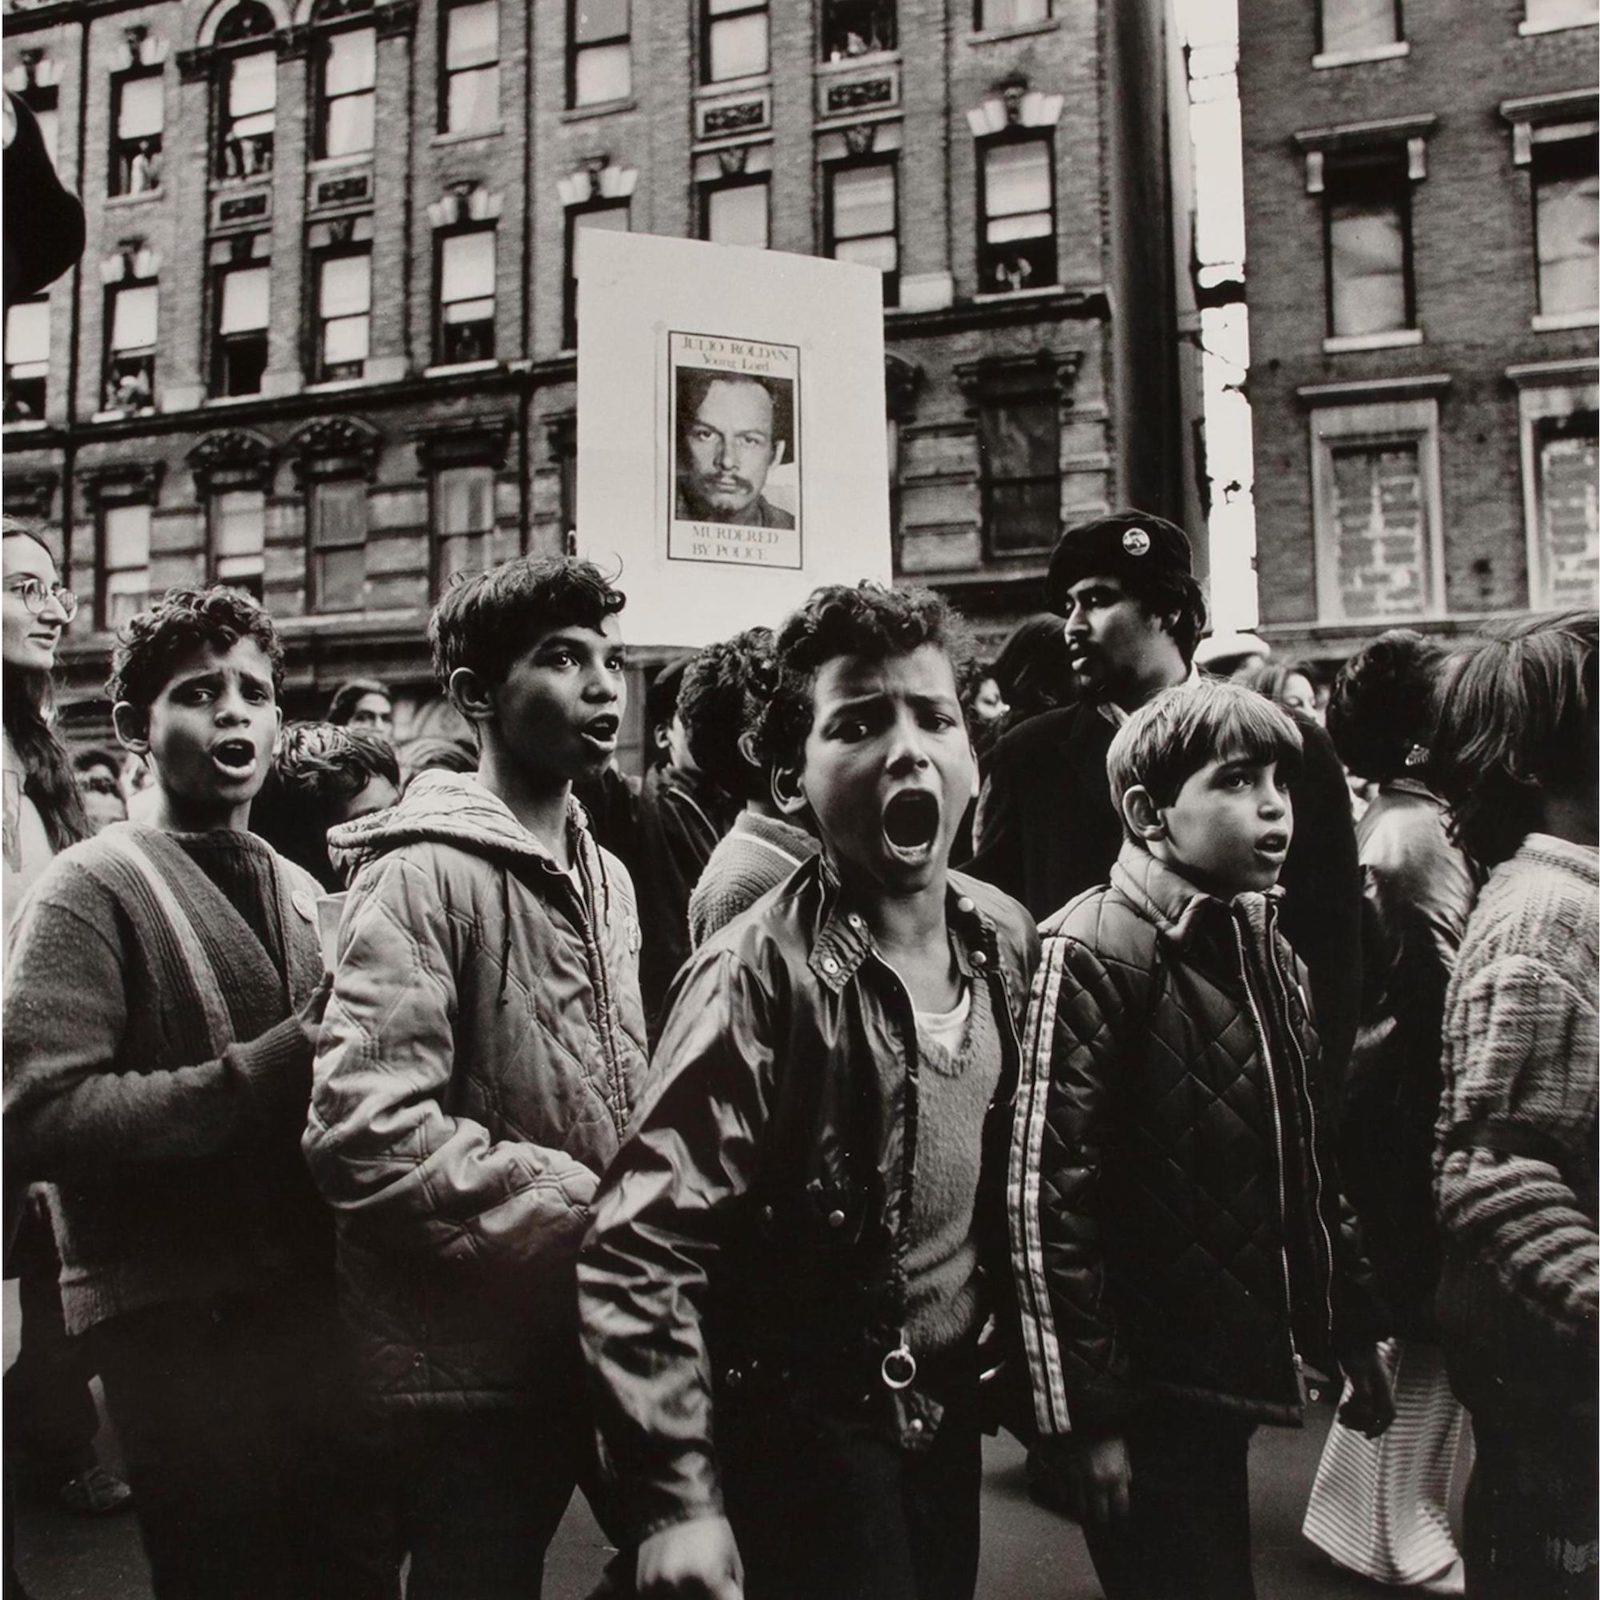 Hiram Maristany, Children in the funeral march of Julio Roldán, 1970. Photograph.